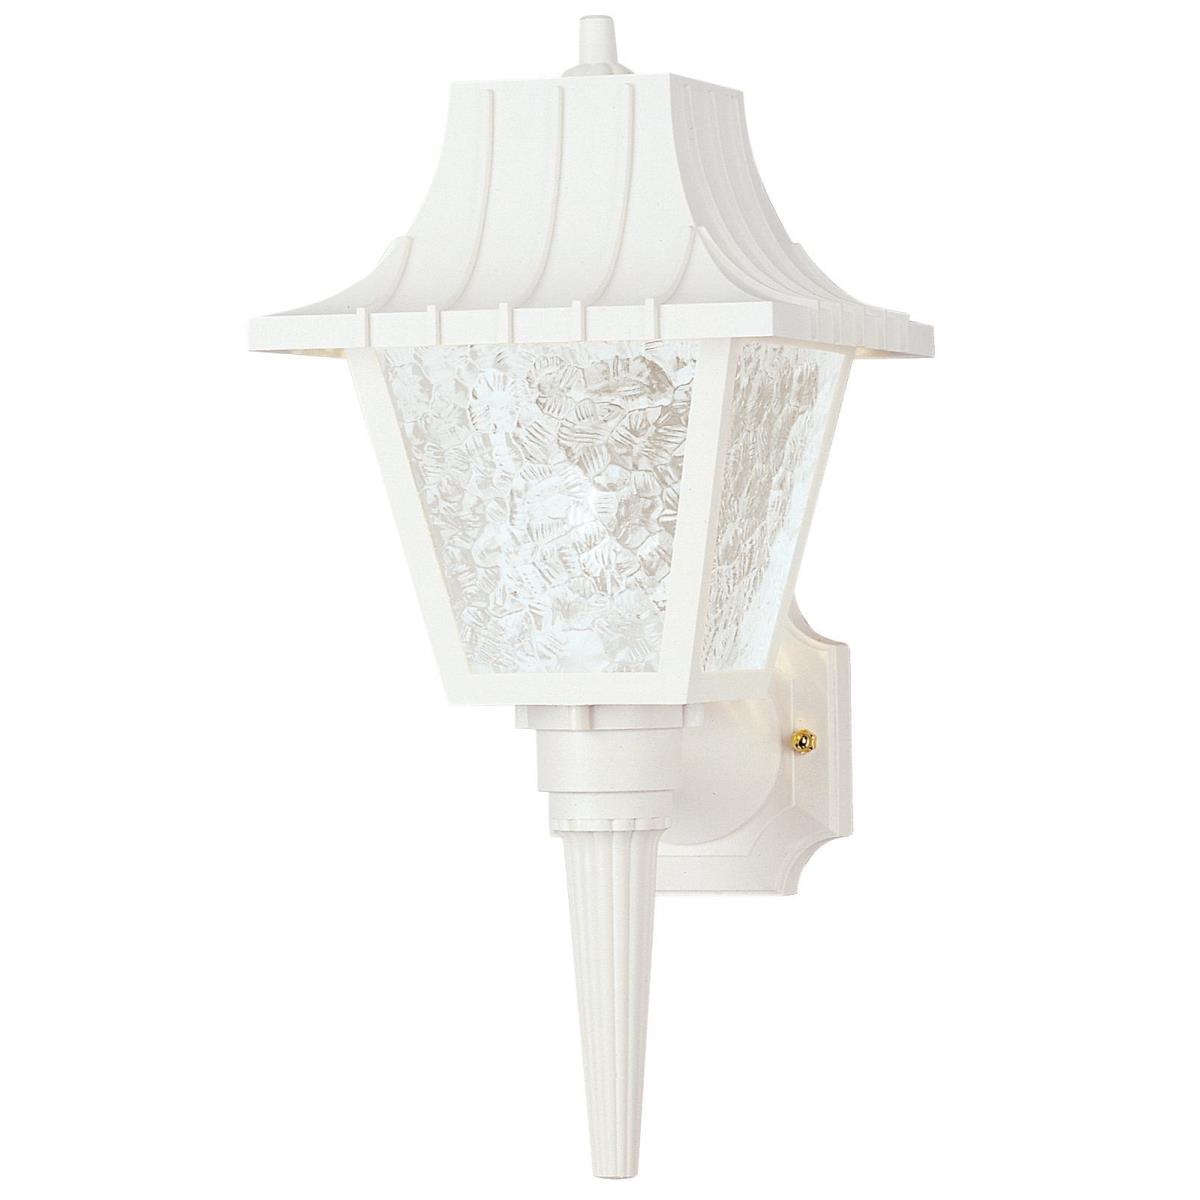 1 Light Hi-Impact Polycarbonate Wall Fixture with Removable Tail White Finish with Clear Textured Acrylic